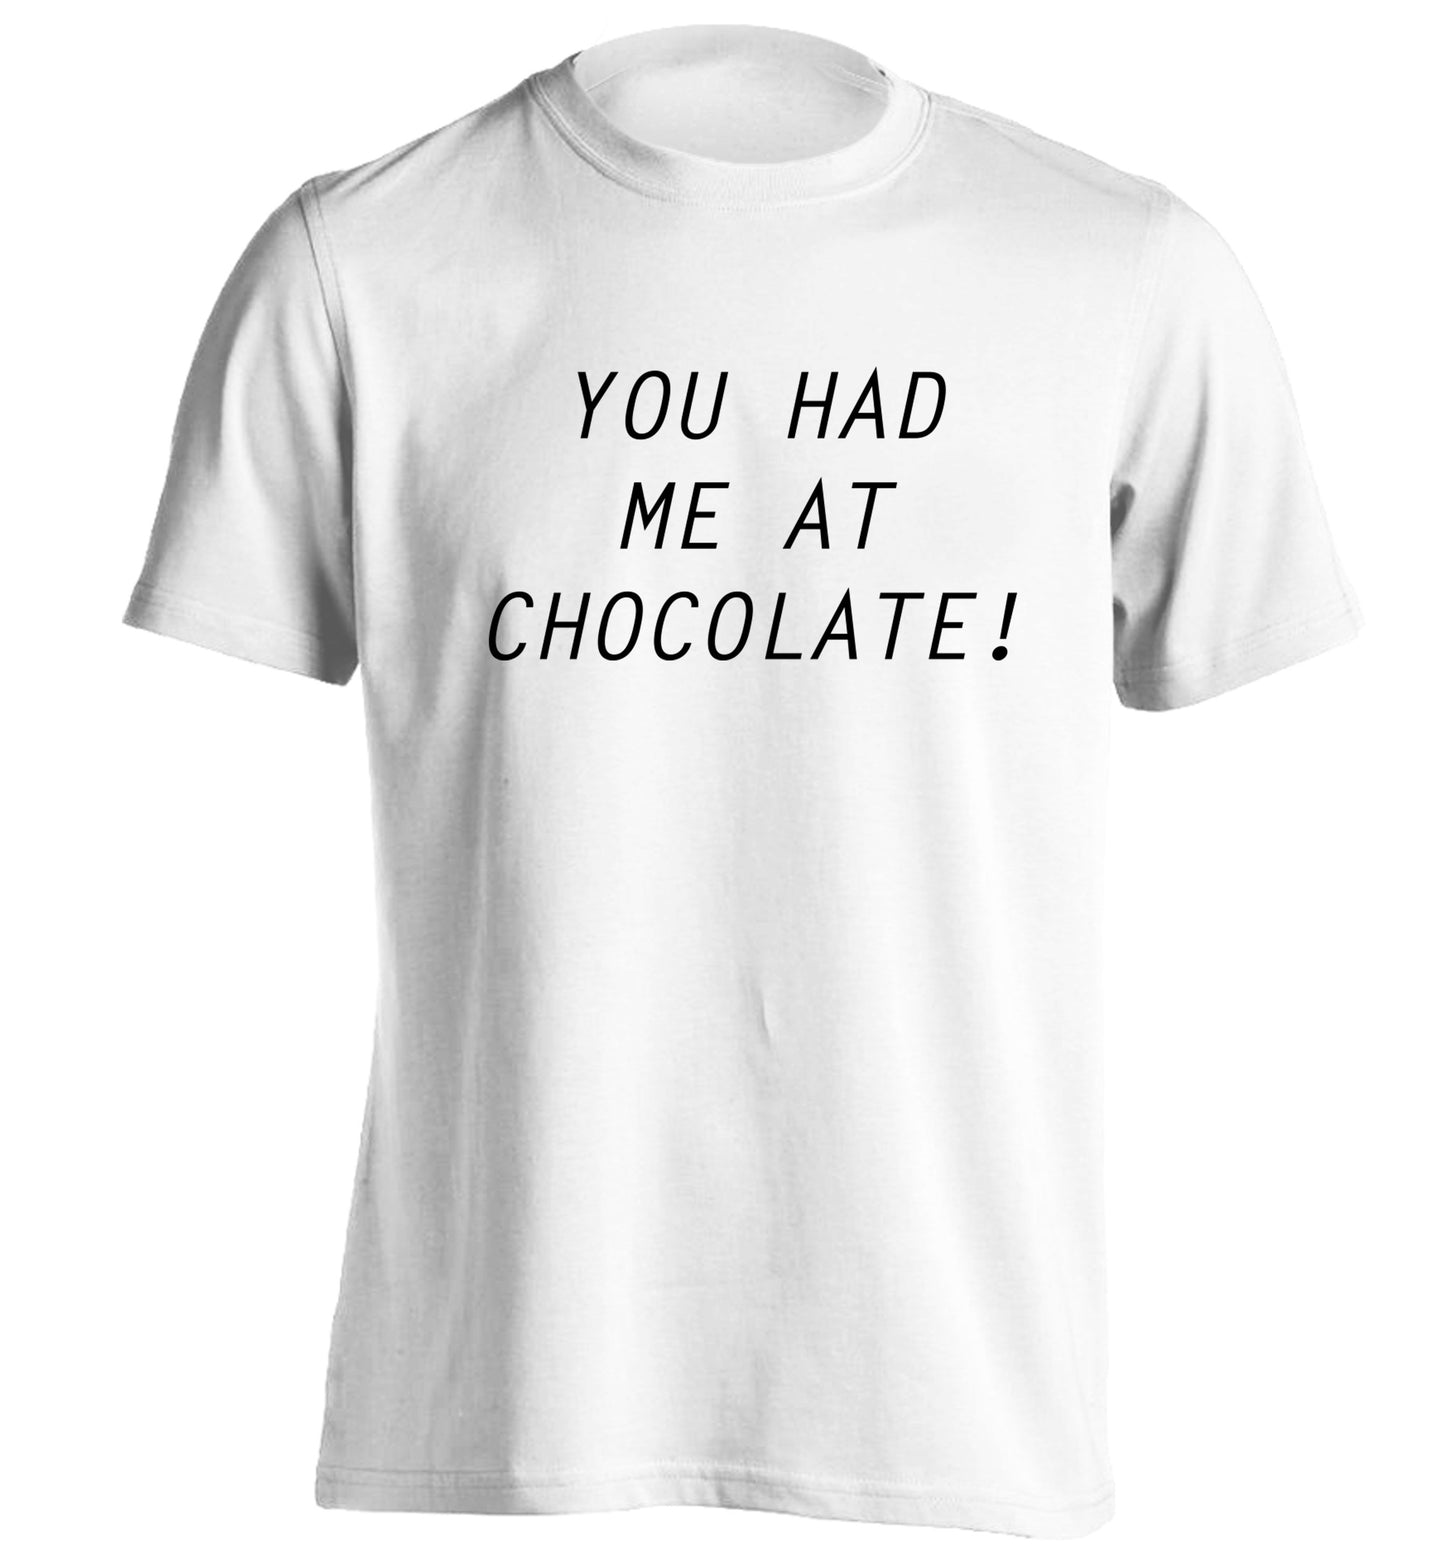 You had me at chocolate adults unisex white Tshirt 2XL